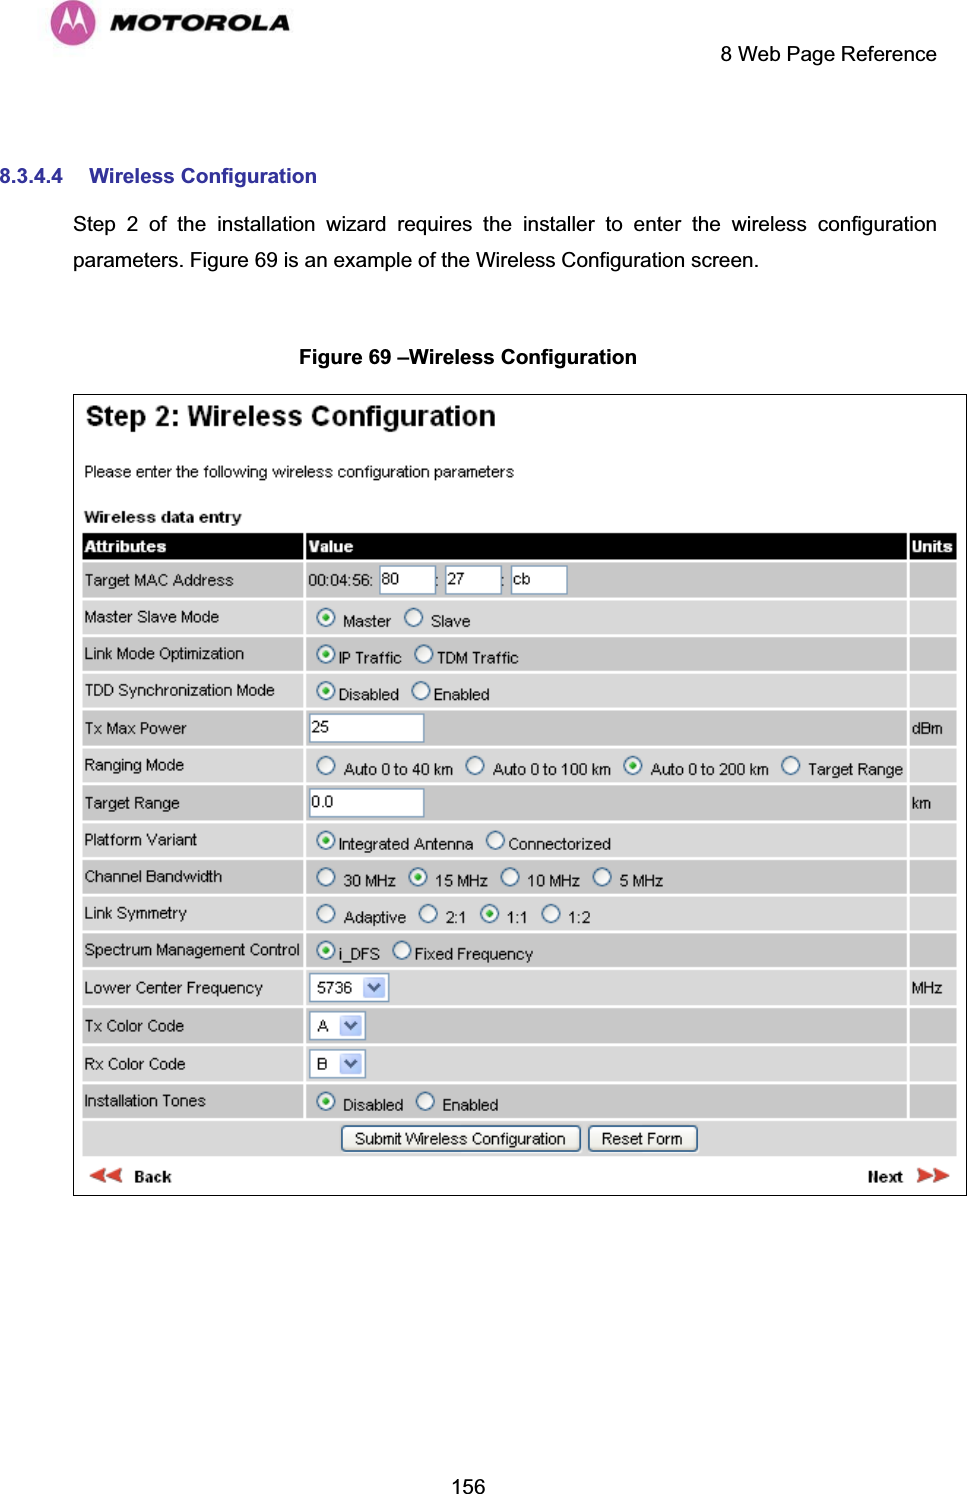     8 Web Page Reference  156 8.3.4.4 Wireless Configuration Step 2 of the installation wizard requires the installer to enter the wireless configuration parameters. Figure 69 is an example of the Wireless Configuration screen.   Figure 69 –Wireless Configuration   